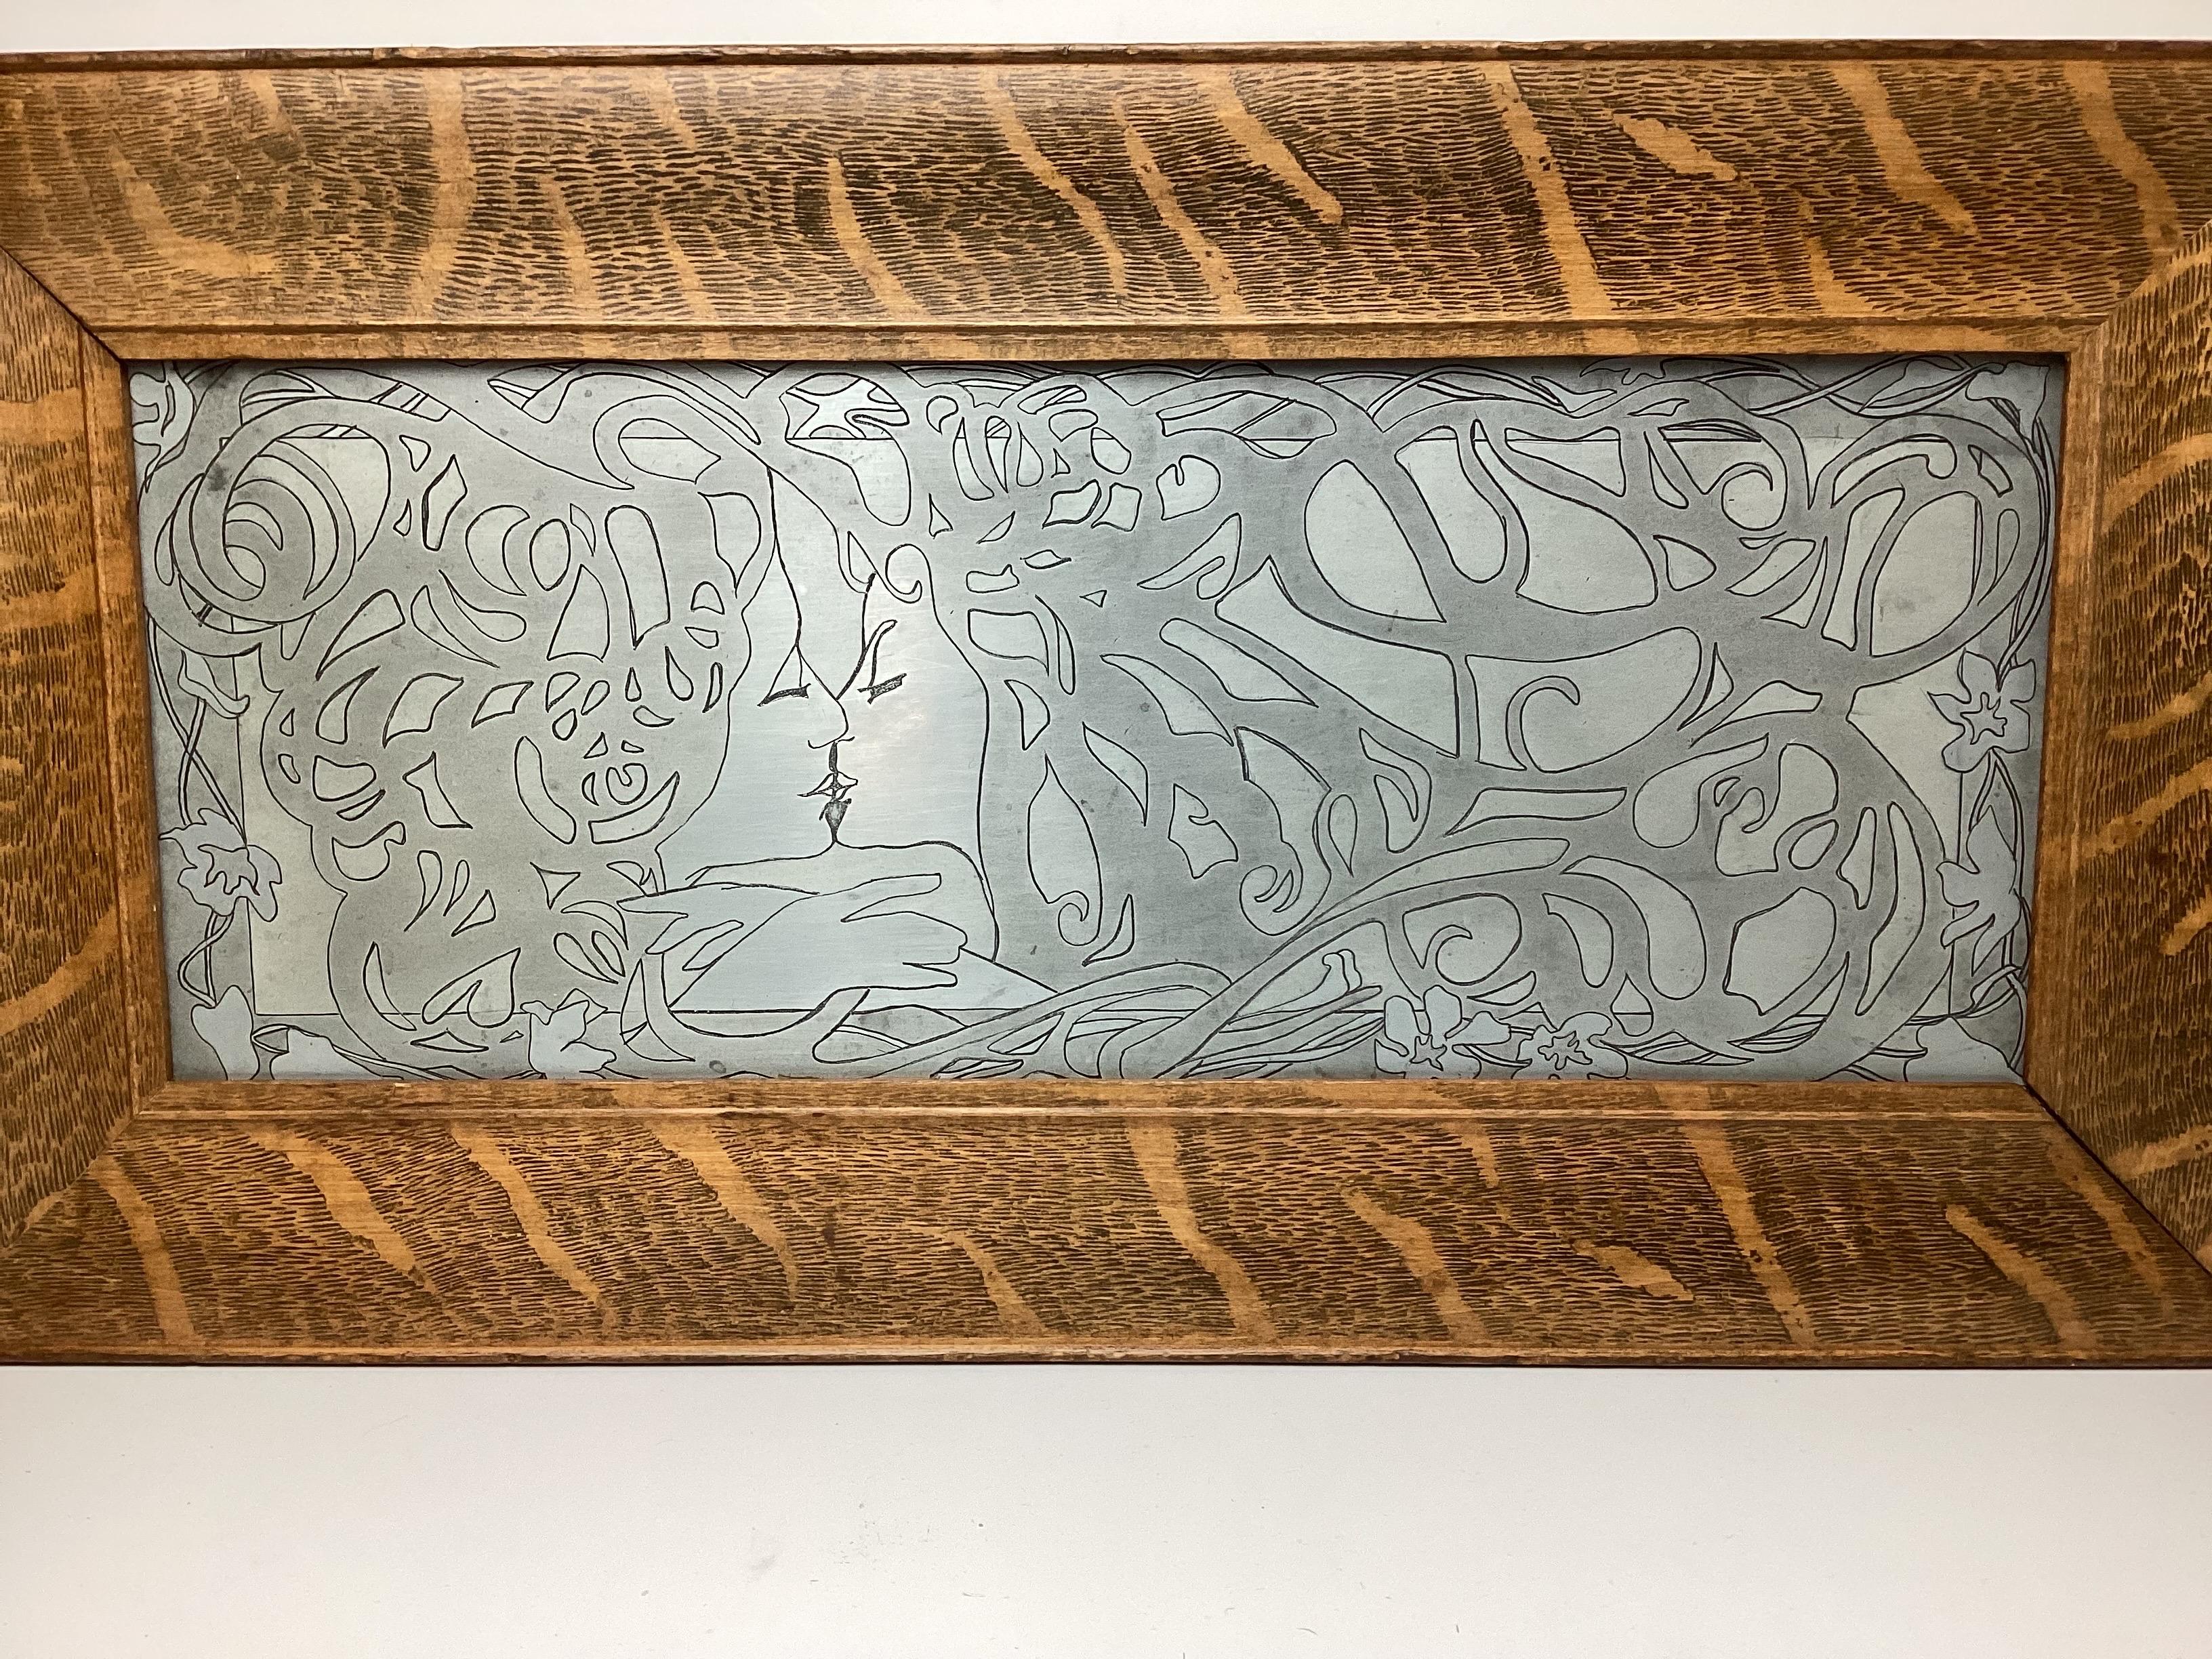 Art Nouveau Metal Etched printer plate in oak frame. This plate was used to print on paper. Oak frame re-set in frame. Wonderful piece.